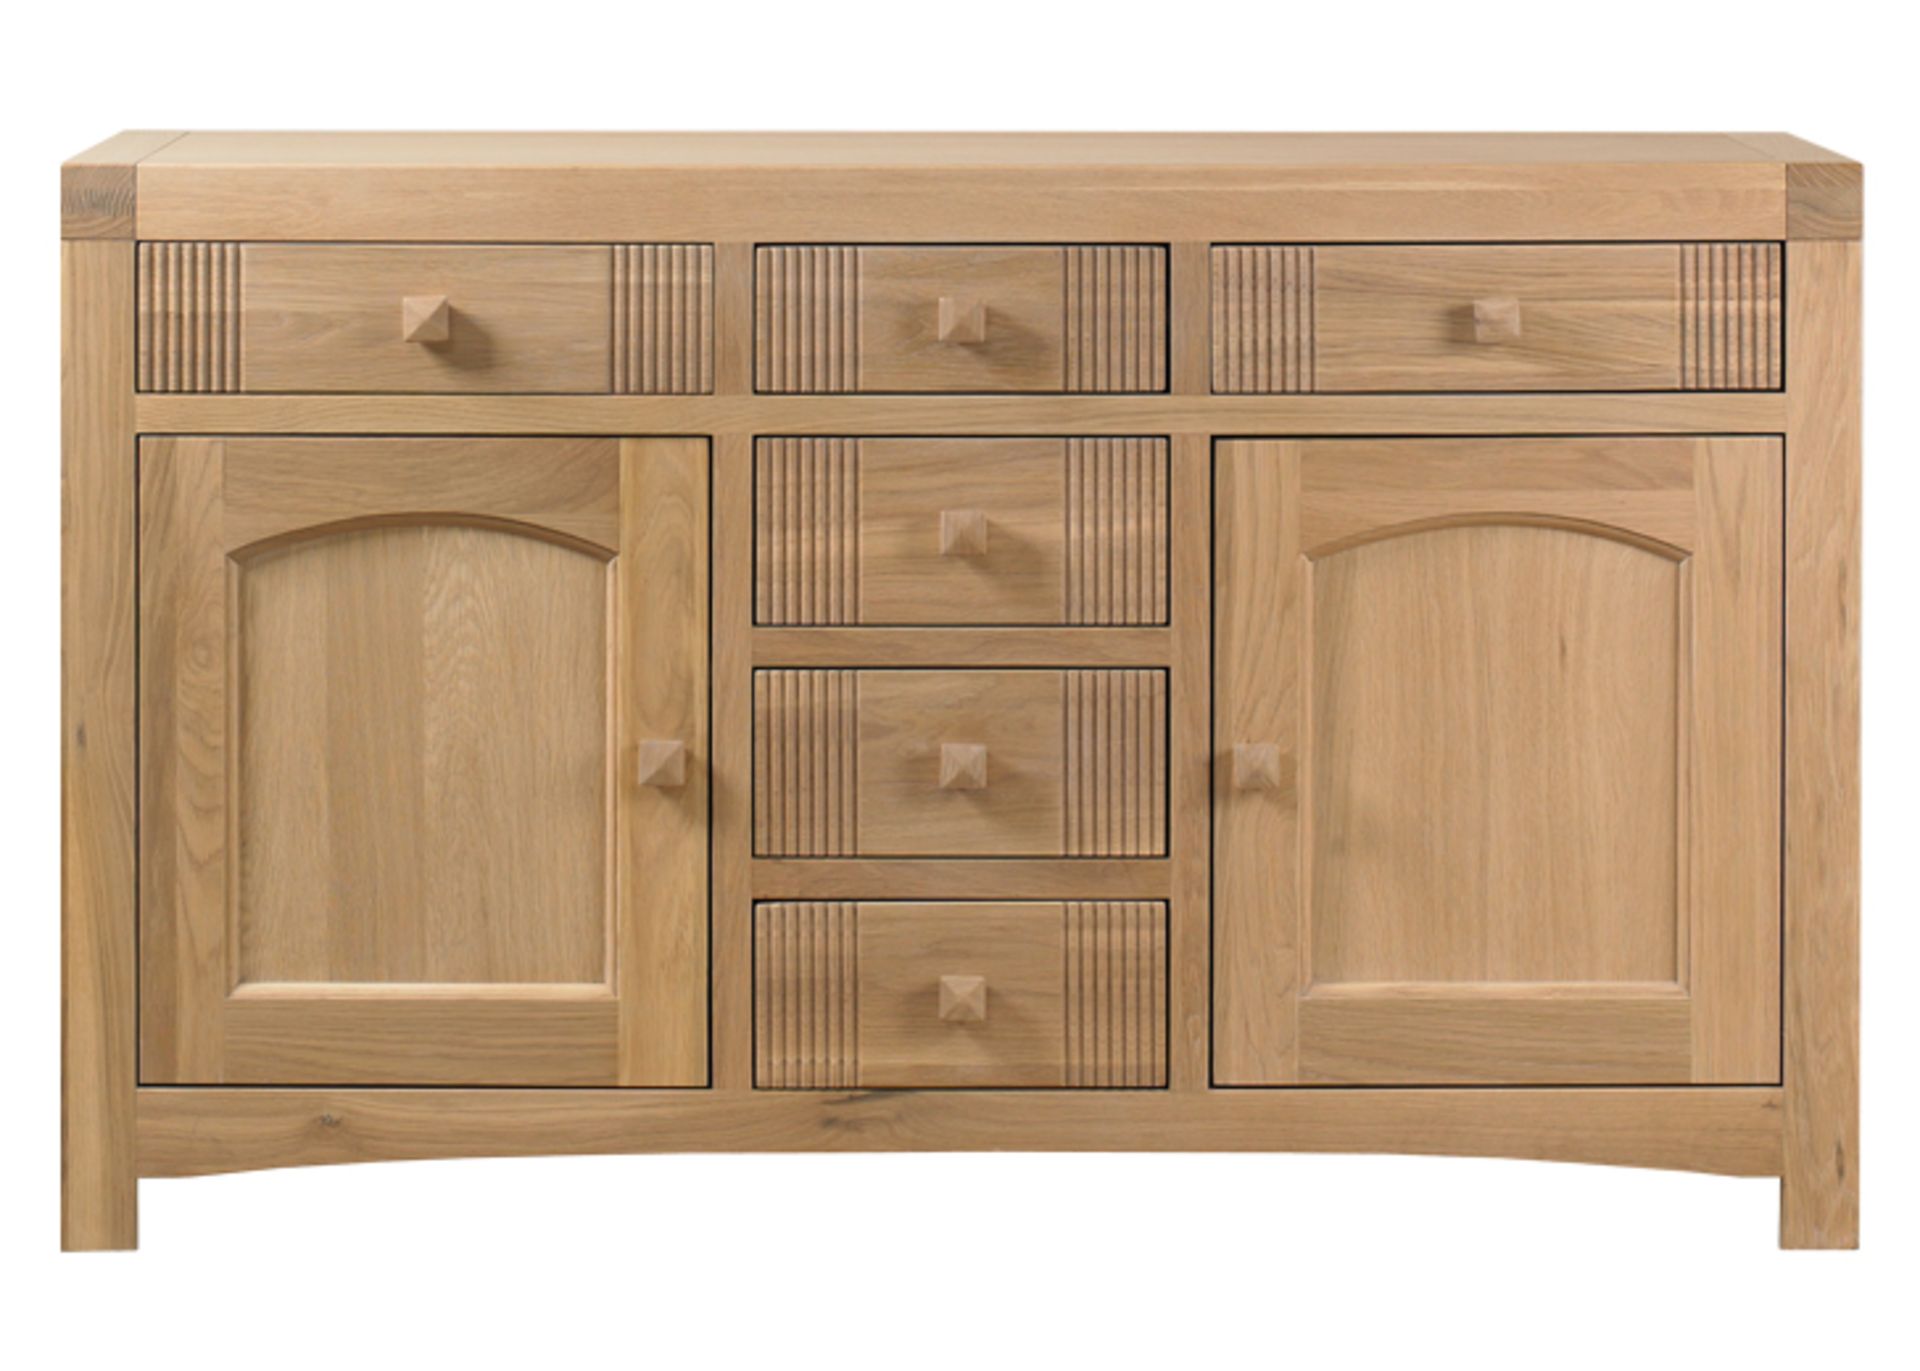 1 x Mark Webster Buckingham Large Sideboad - Two Door/Six Drawer - White Wash Oak With a Timeless - Image 3 of 5